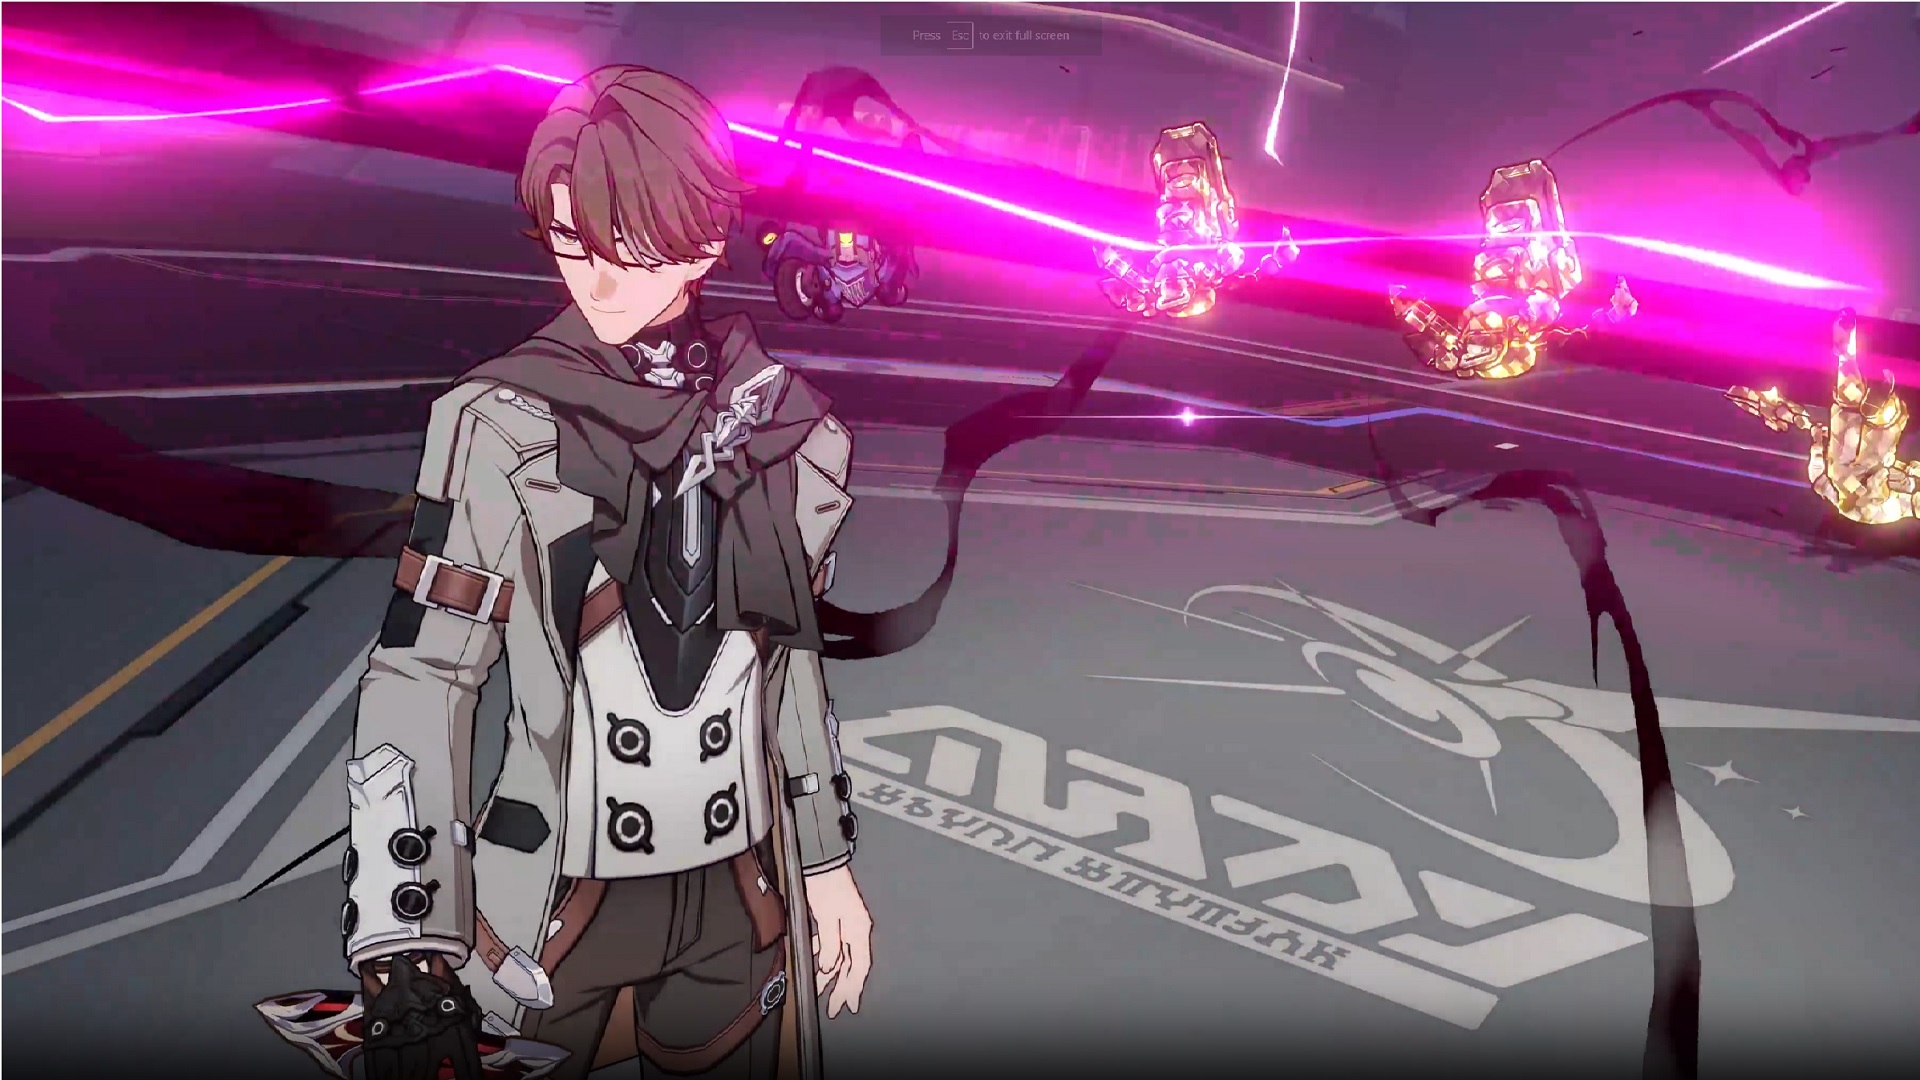 Welt, a five-star Imaginary character that you might pull in a Honkai Star Rail reroll, performs his ultimate on a group of enemies, tearing through them with pink neon light.